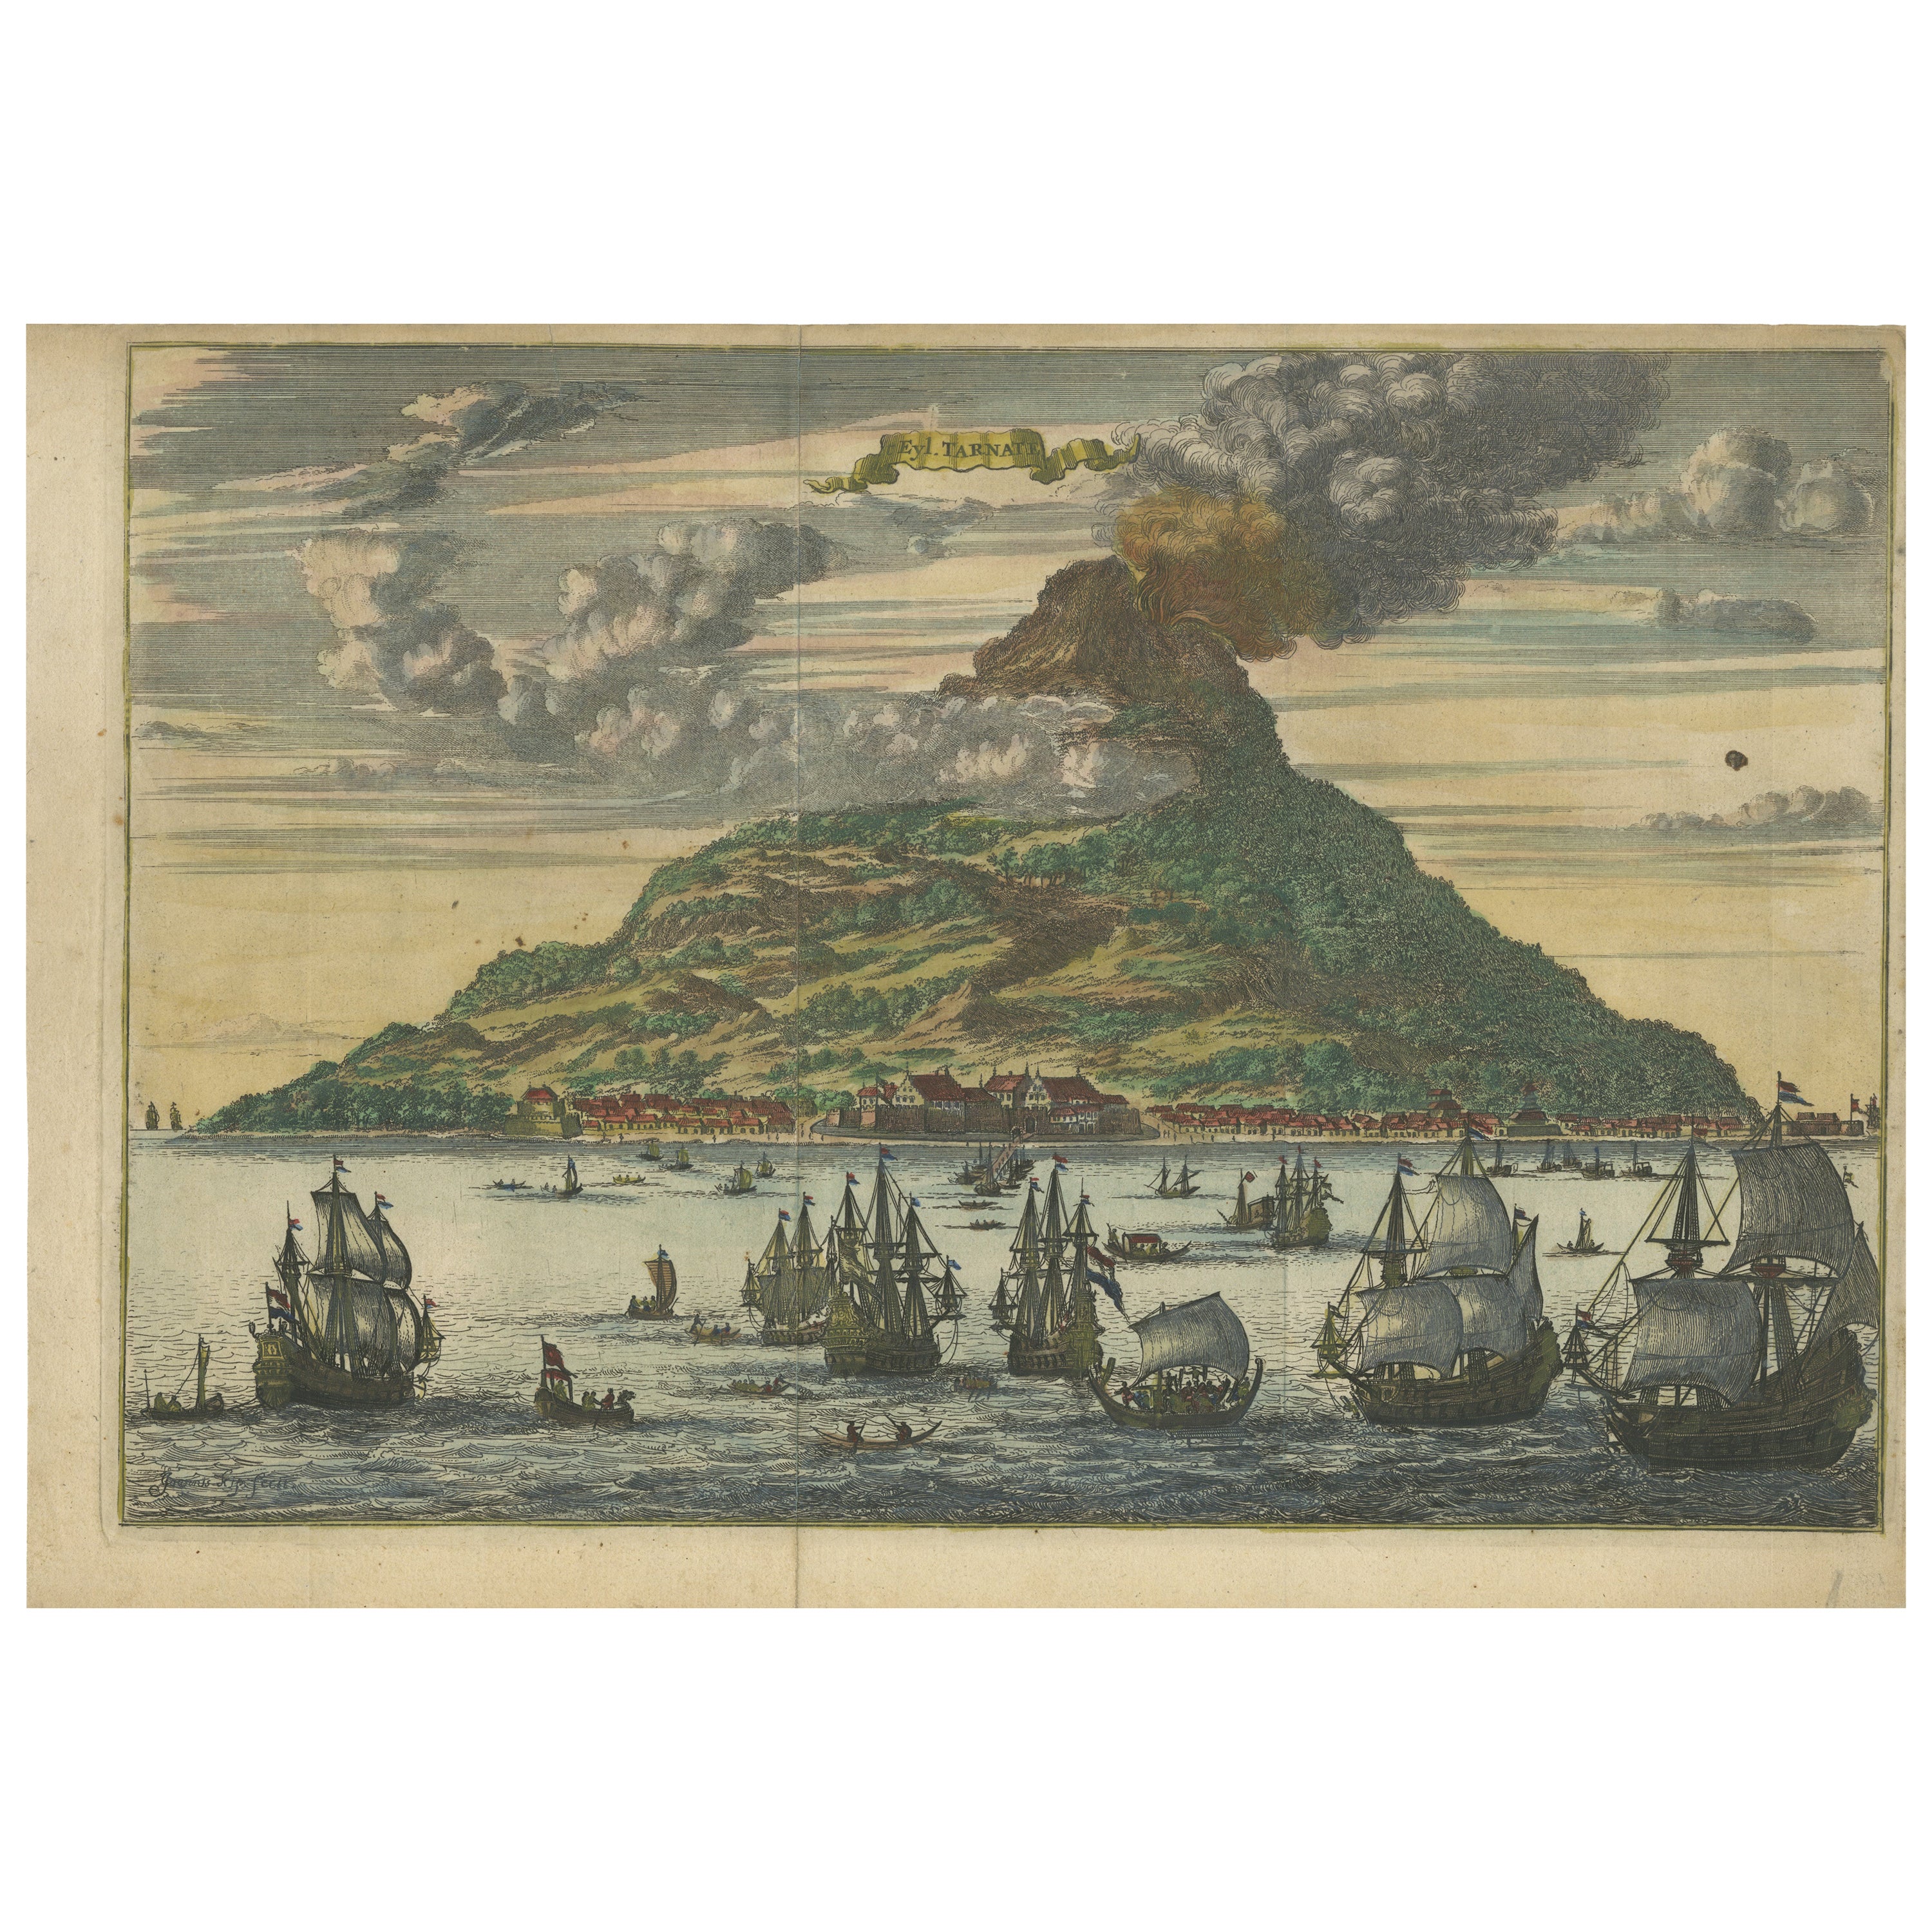 Volcanic Island of Ternate with VOC Ships in The Dutch East Indies, 1682